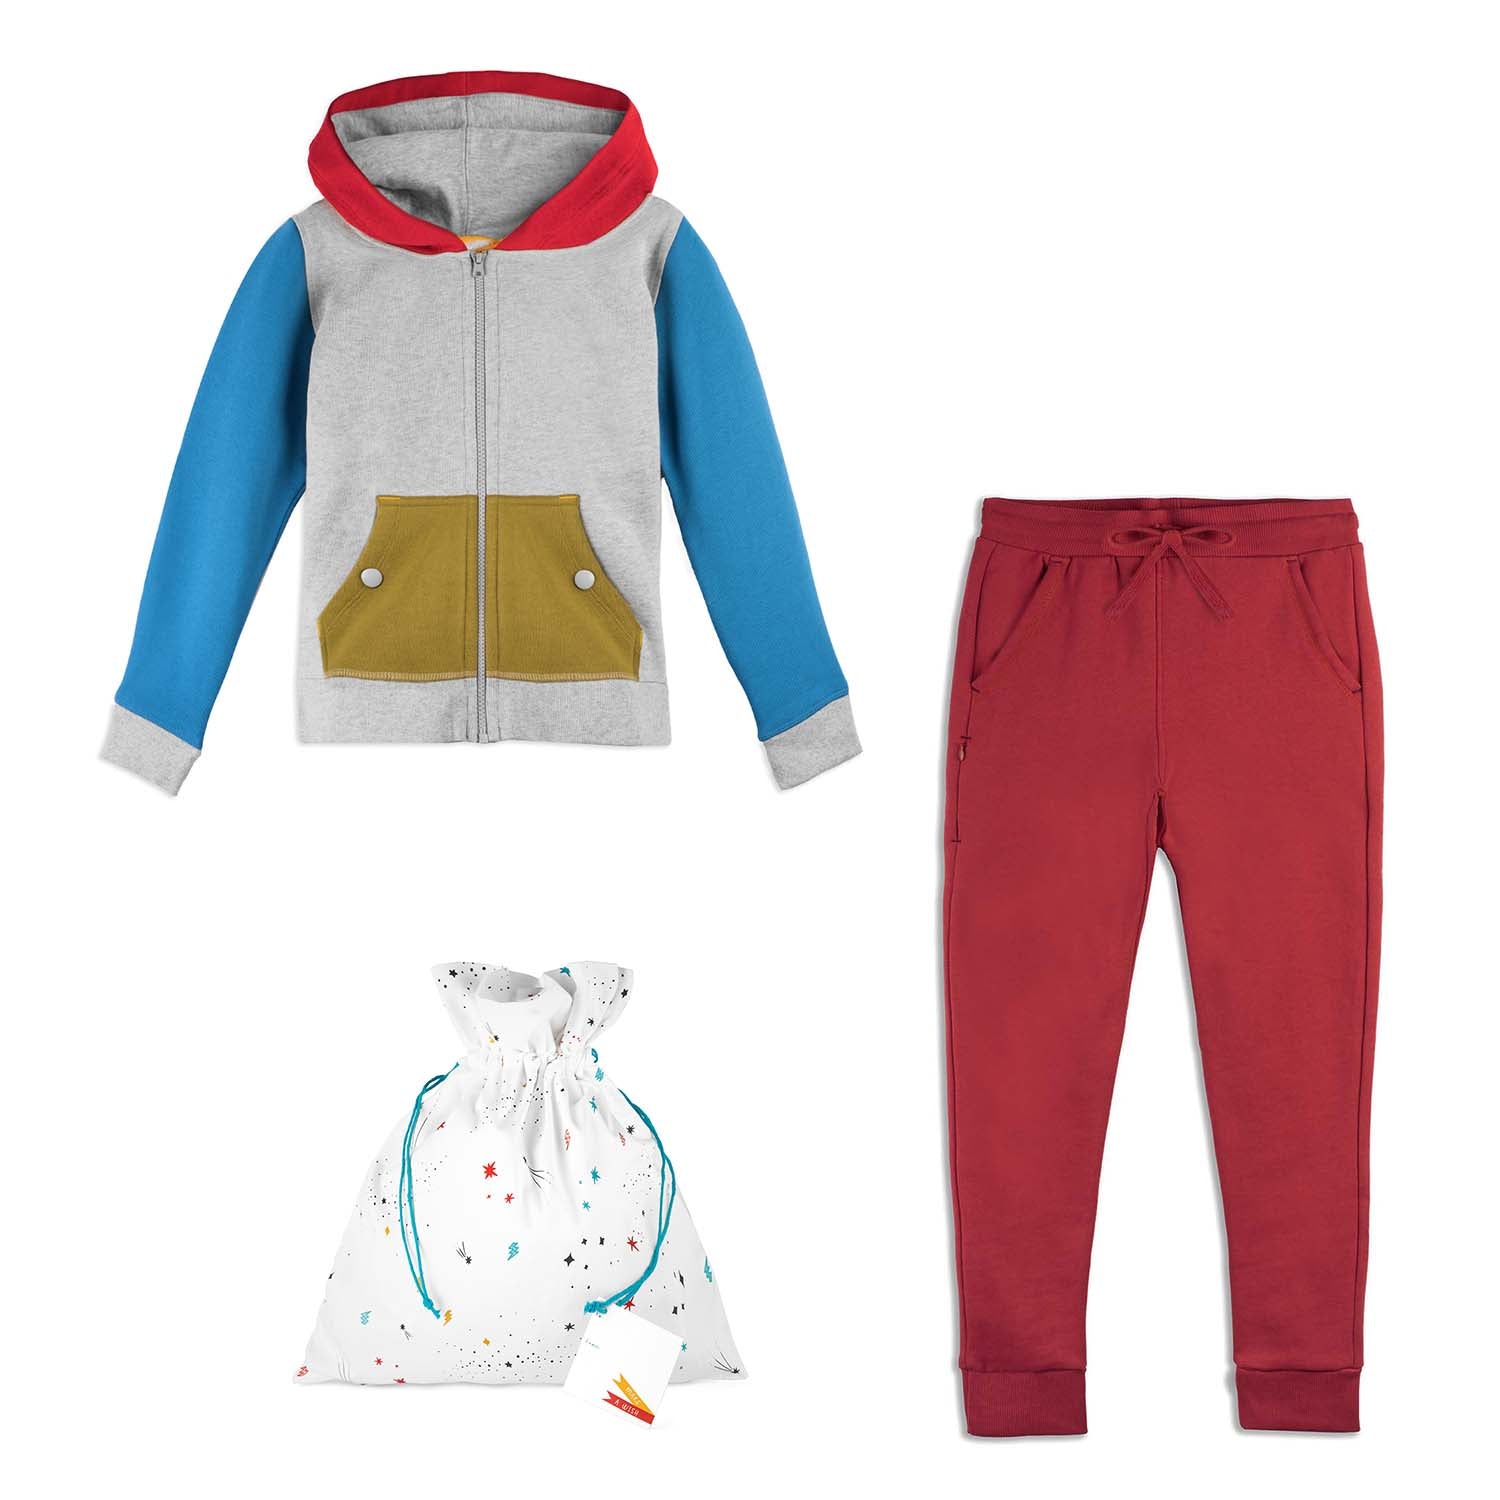 Gift Set: Zip Up Hoodie + Sweatpant with a Reusable Fabric Gift Bag